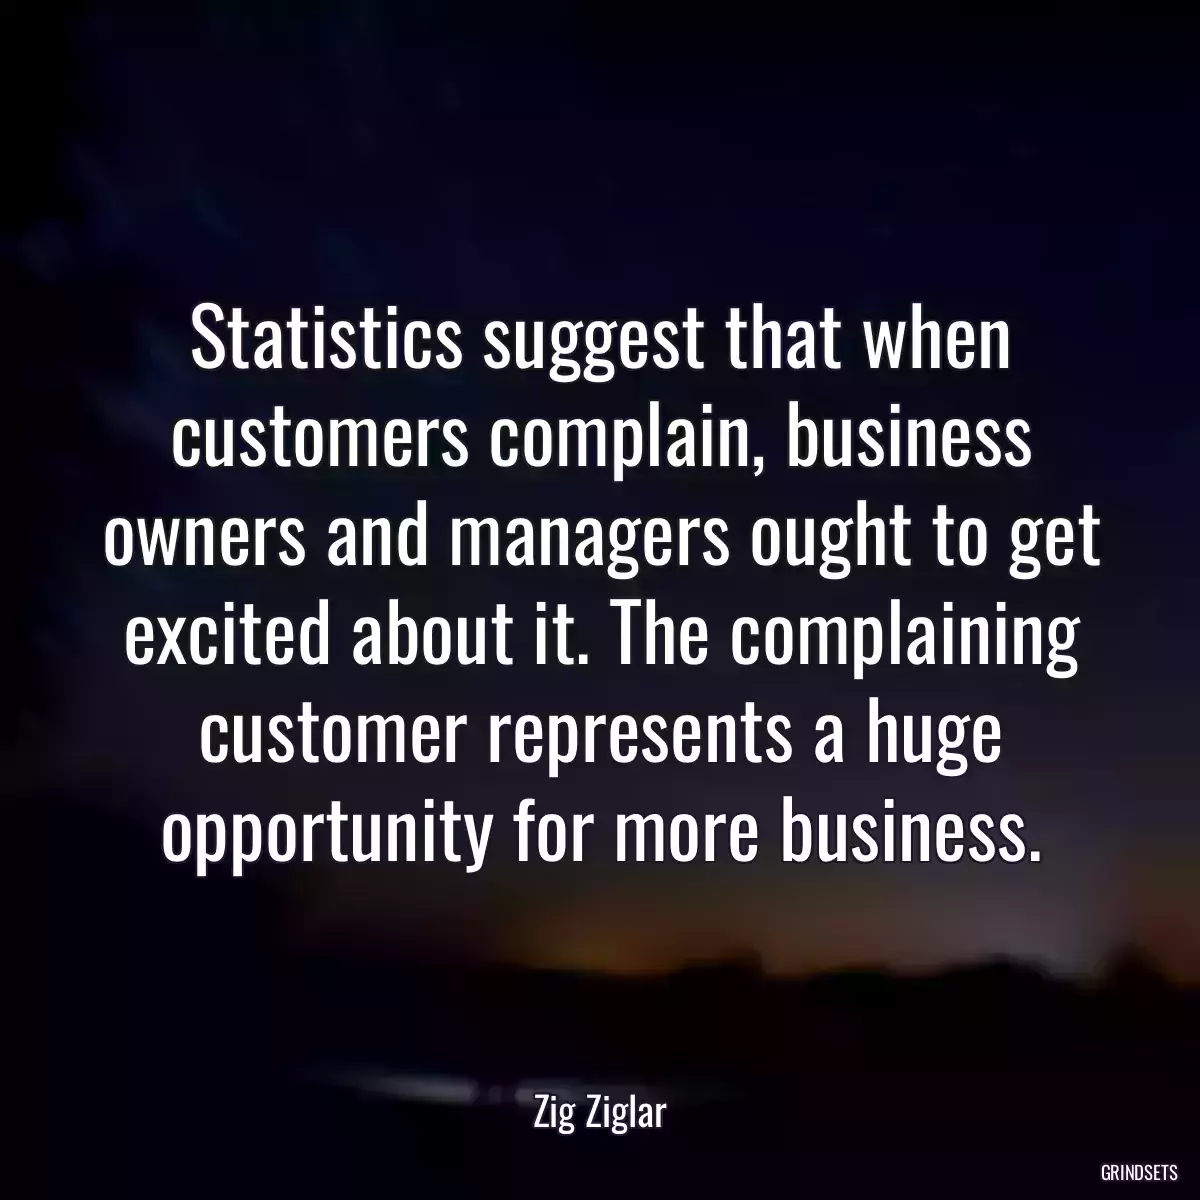 Statistics suggest that when customers complain, business owners and managers ought to get excited about it. The complaining customer represents a huge opportunity for more business.